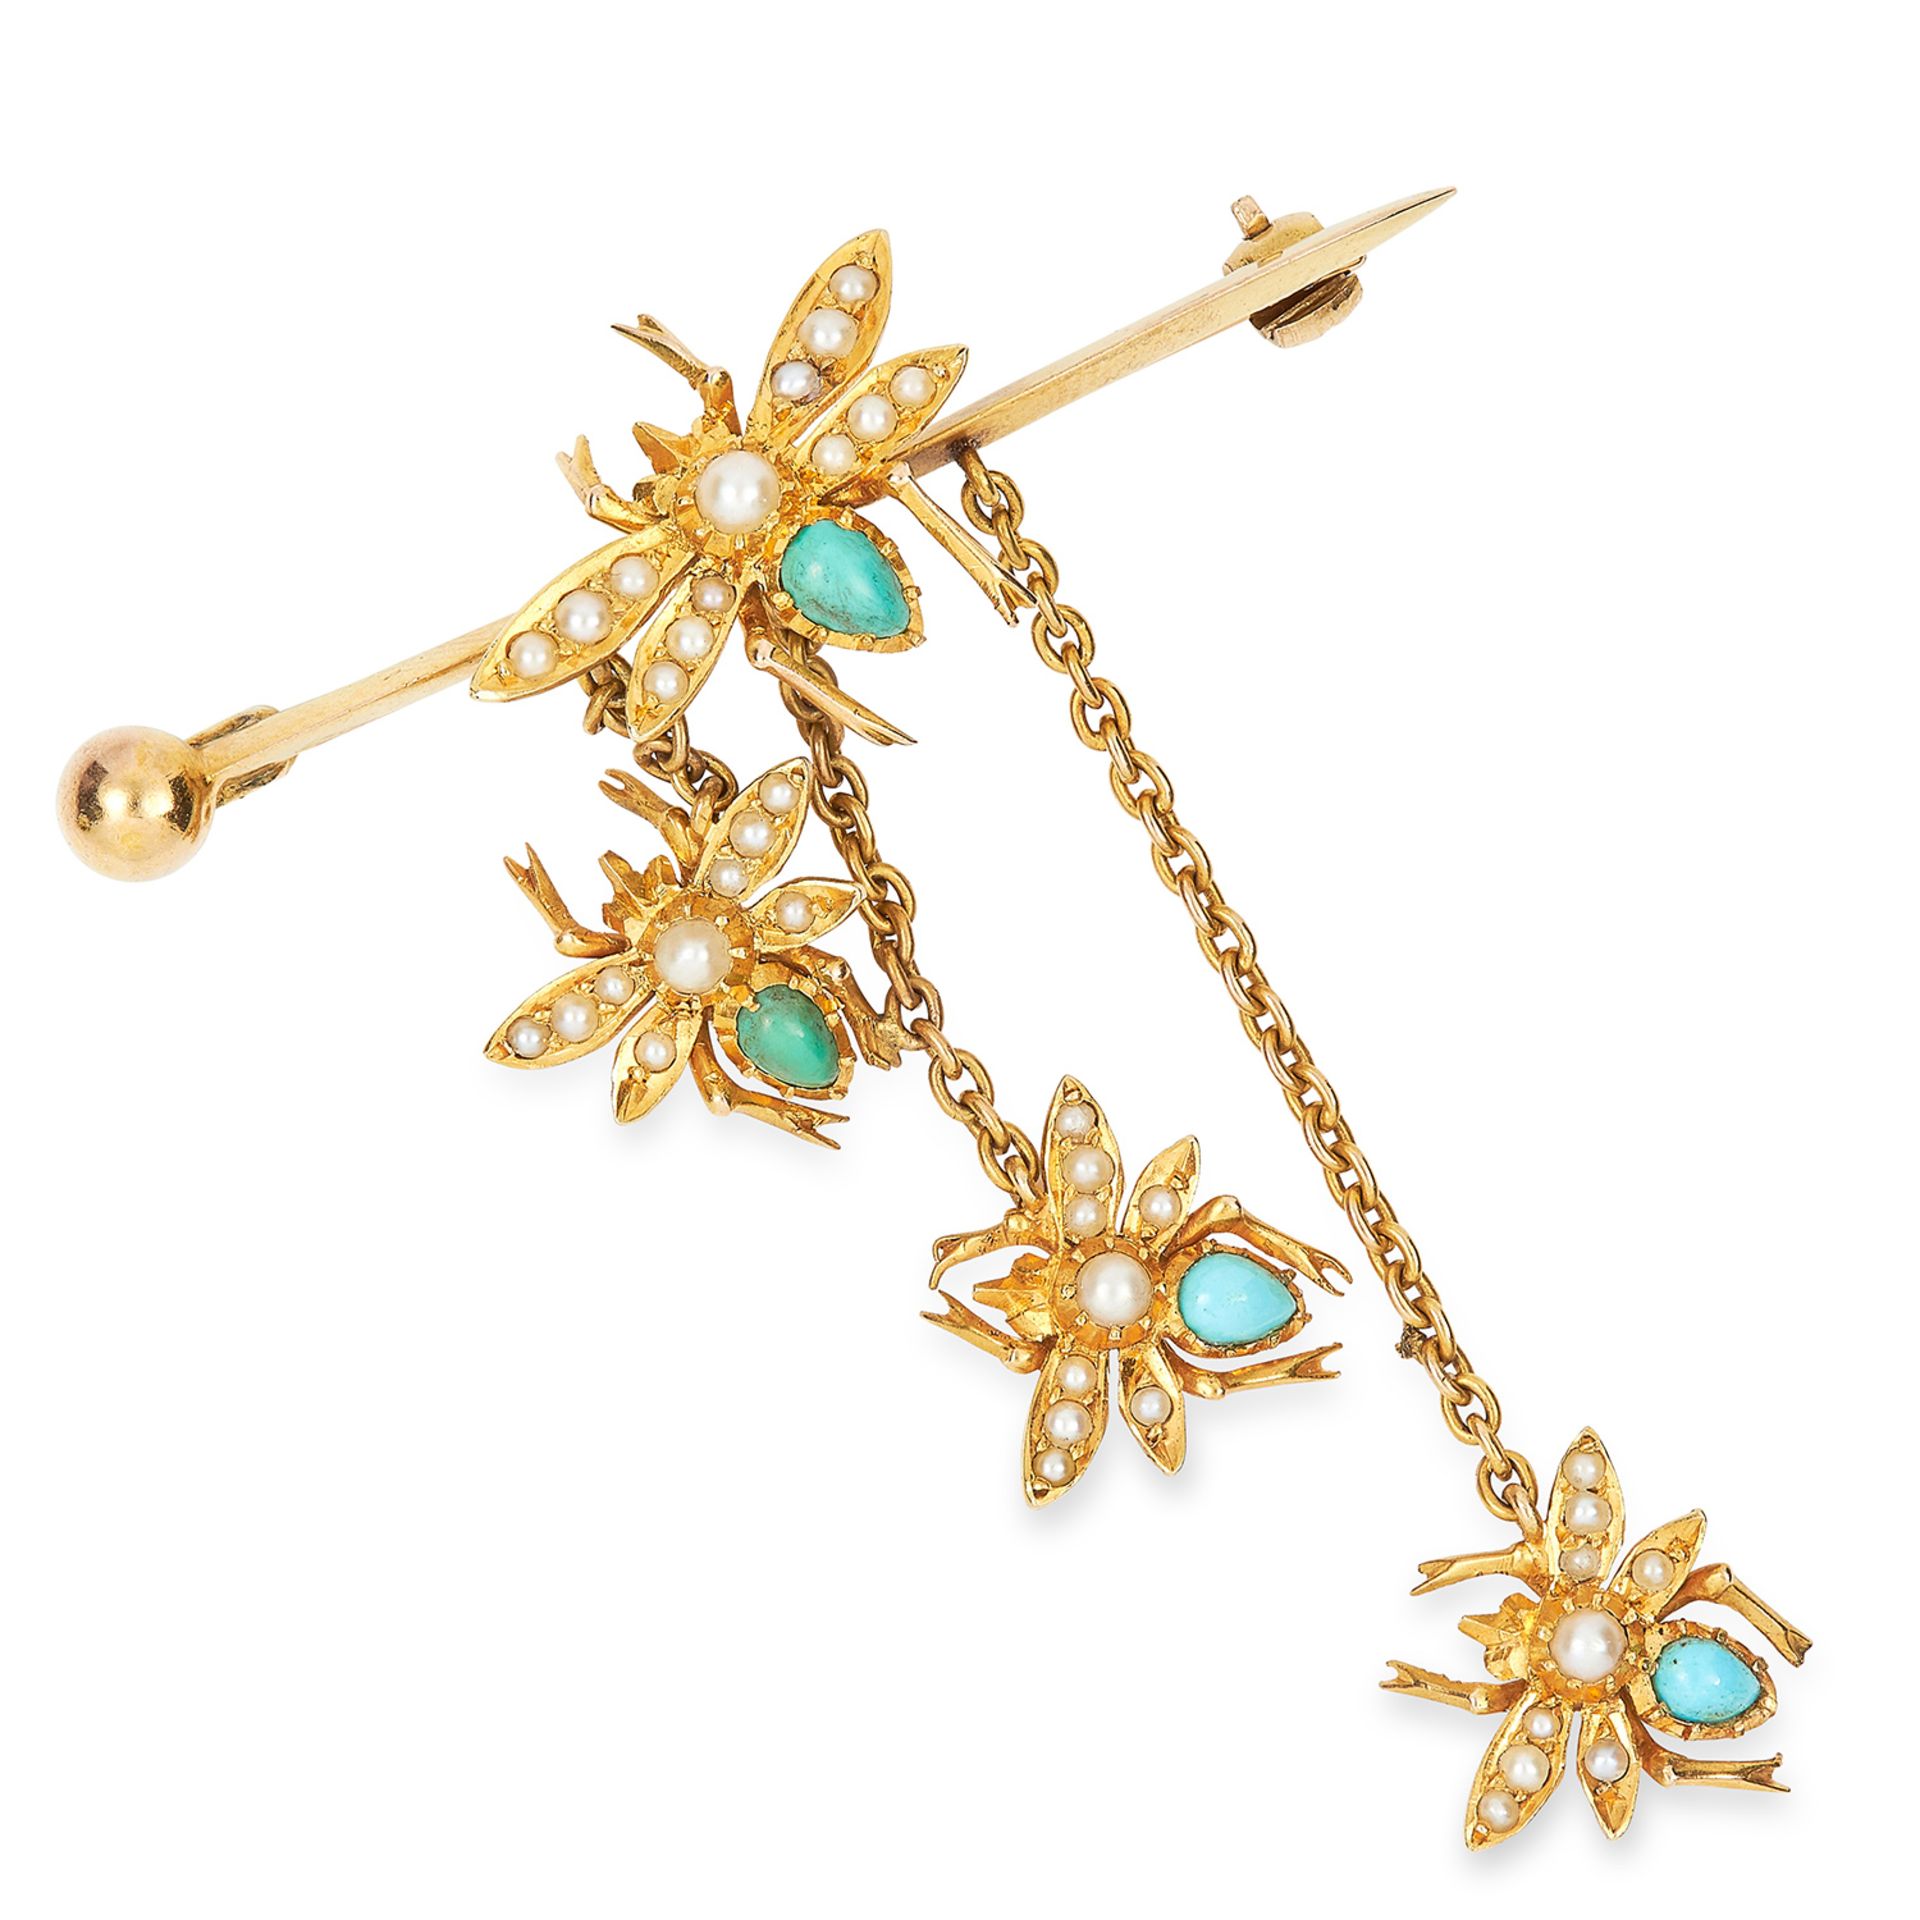 ANTIQUE TURQUOISE AND SEED PEARL BUG BROOCH in high carat yellow gold, comprising of four